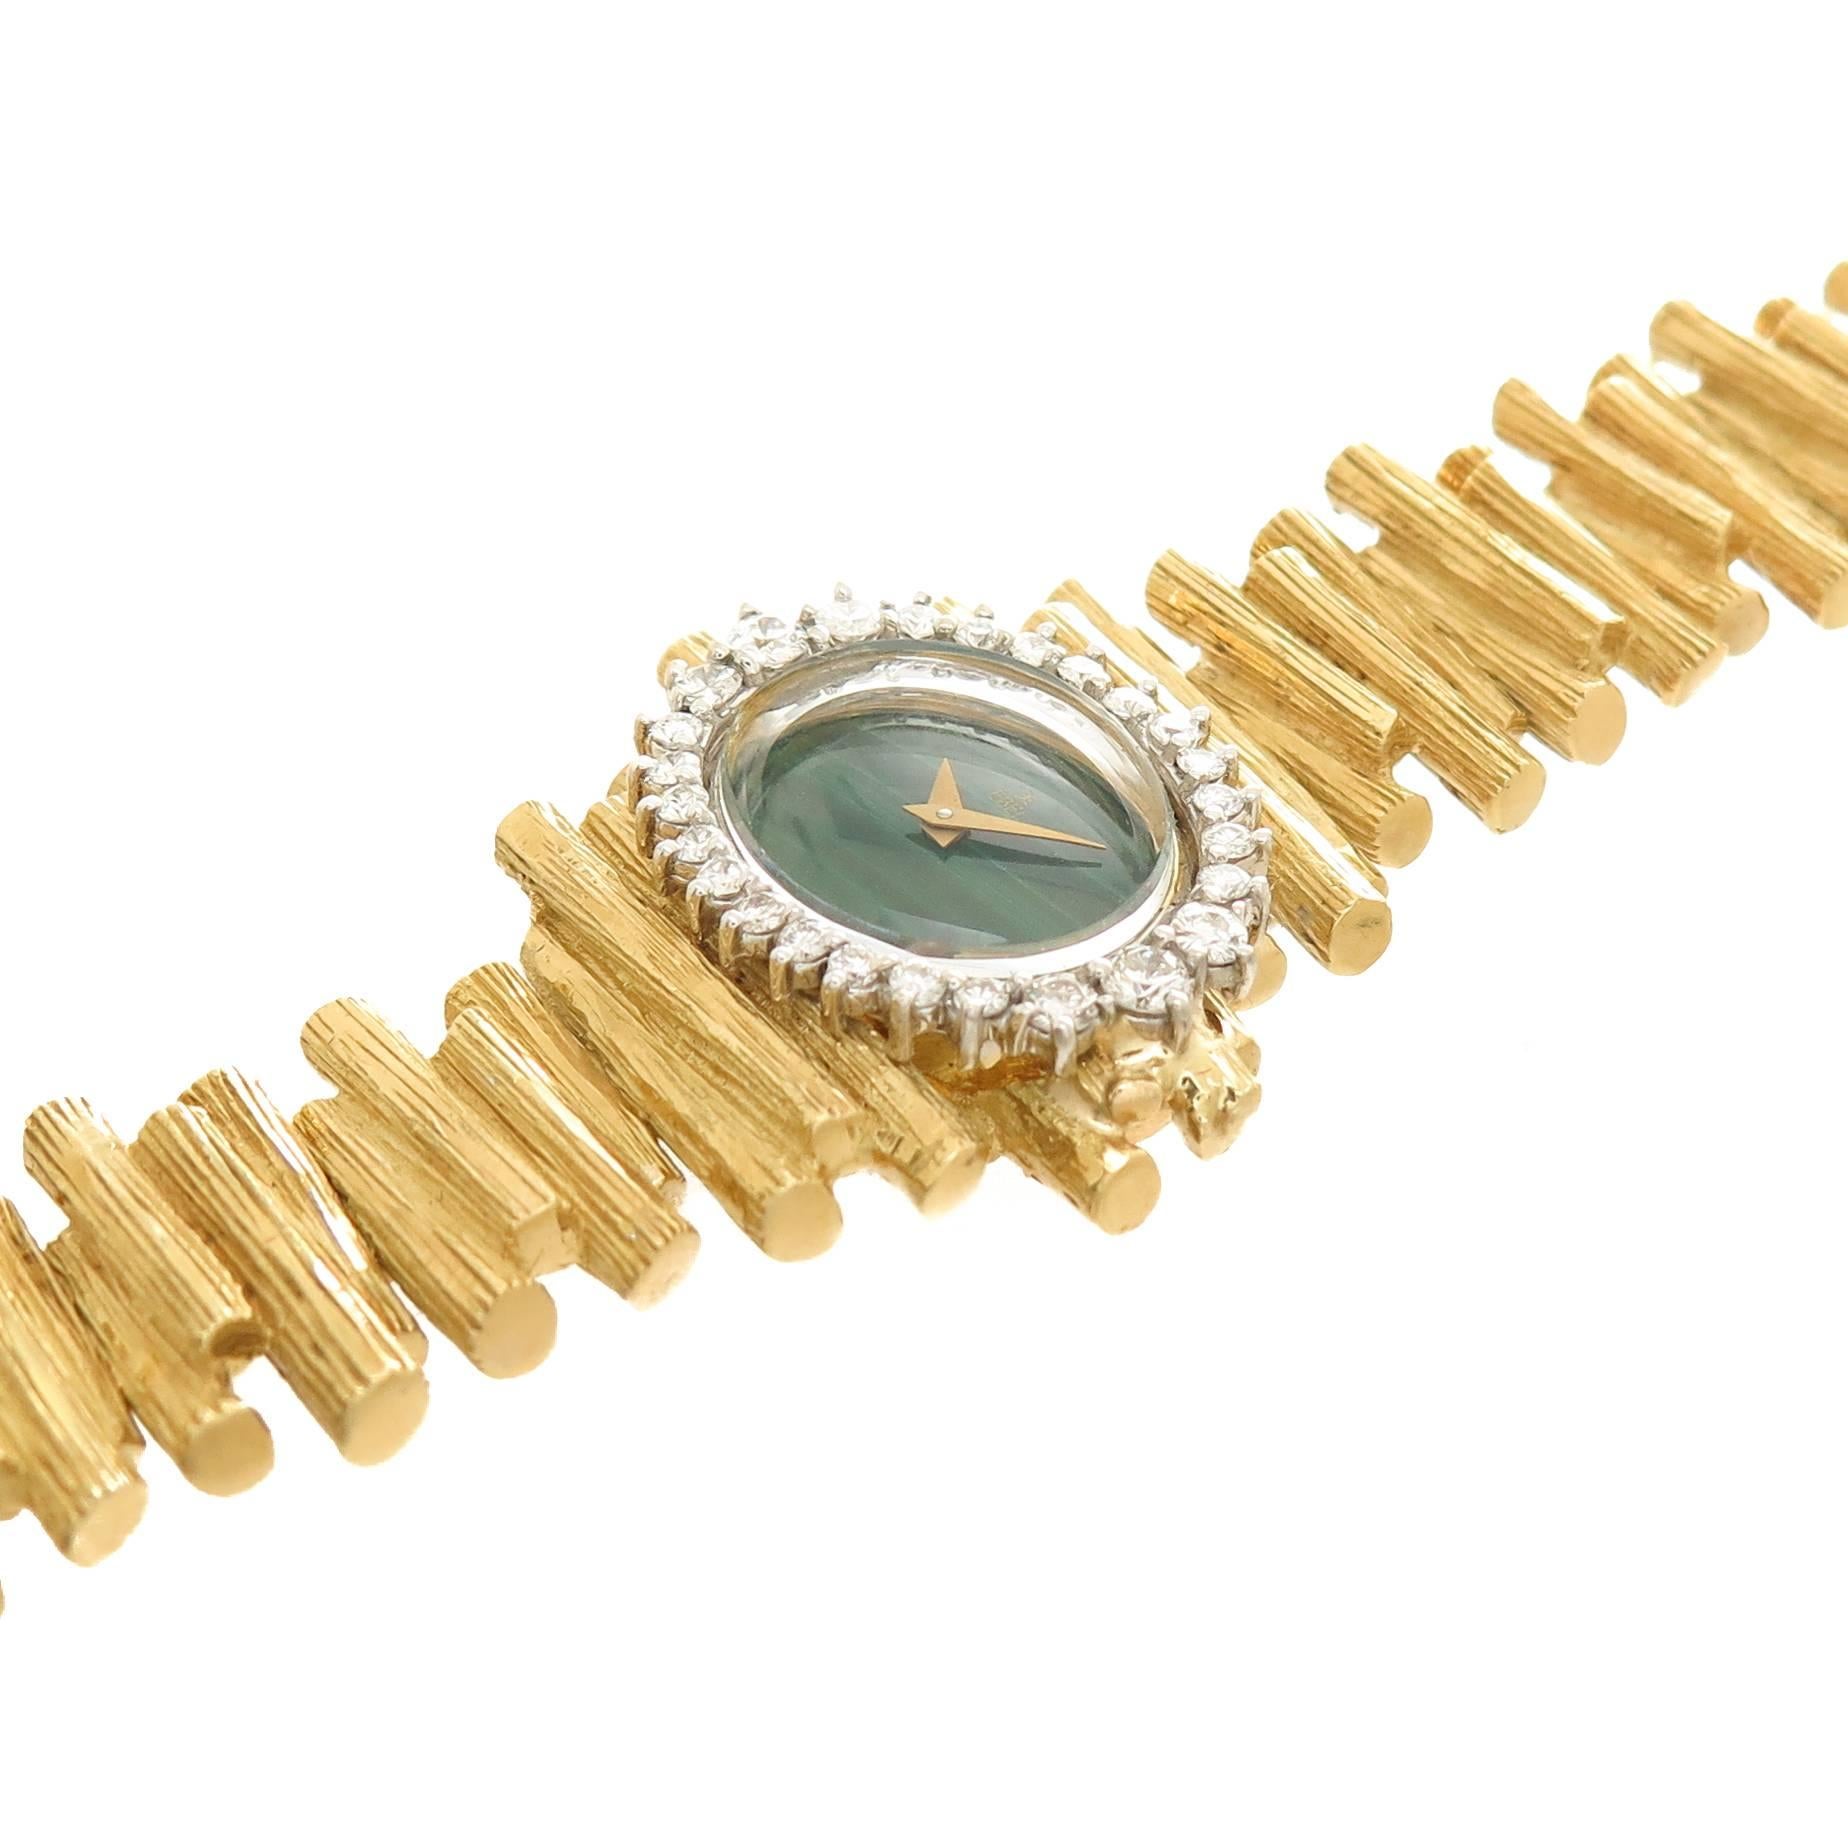 Circa 1960s Ebel 18K yellow Gold Ladies Wrist watch, measuring 6 3/4 inches in length and 5/8 inch wide with a textured finish. The White Gold Bezel is set with Round Brilliant cut Diamonds totaling 1 carat and grading as G in Color and VS in